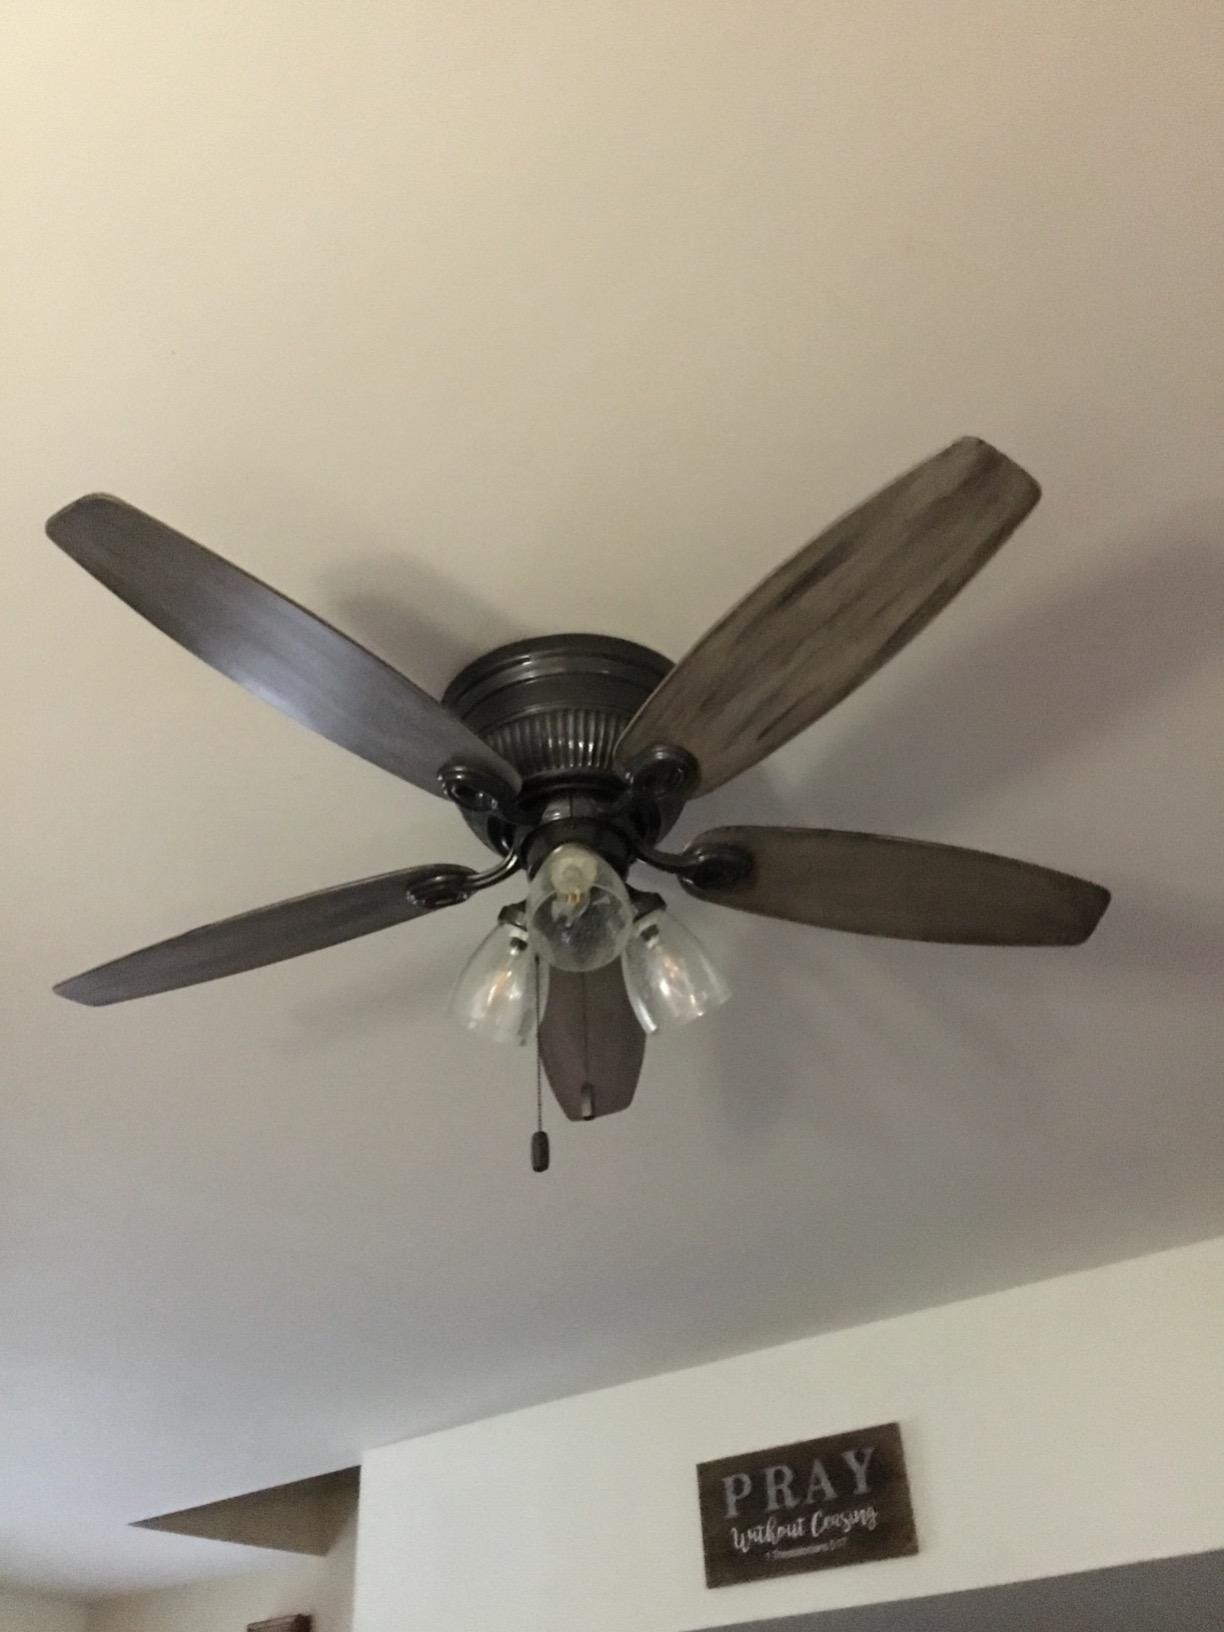 reveiwer&#x27;s fan now painted all black; previously it was brass-looking.